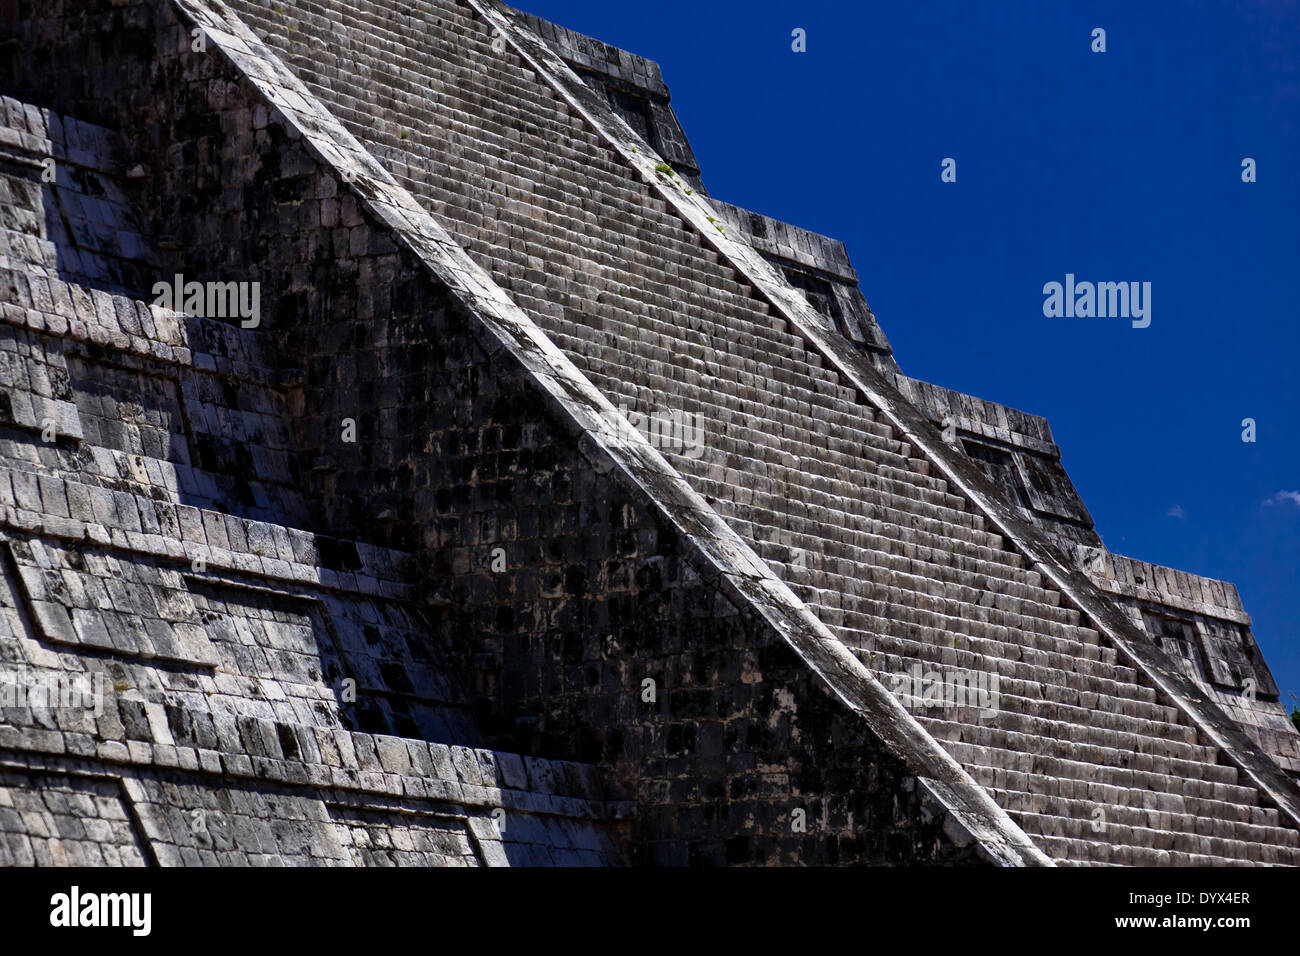 Detail of ancient stairs of a Mayan pyramid in Chichen Itza Archaeological site in Yucatan Peninsula, Mexico Stock Photo